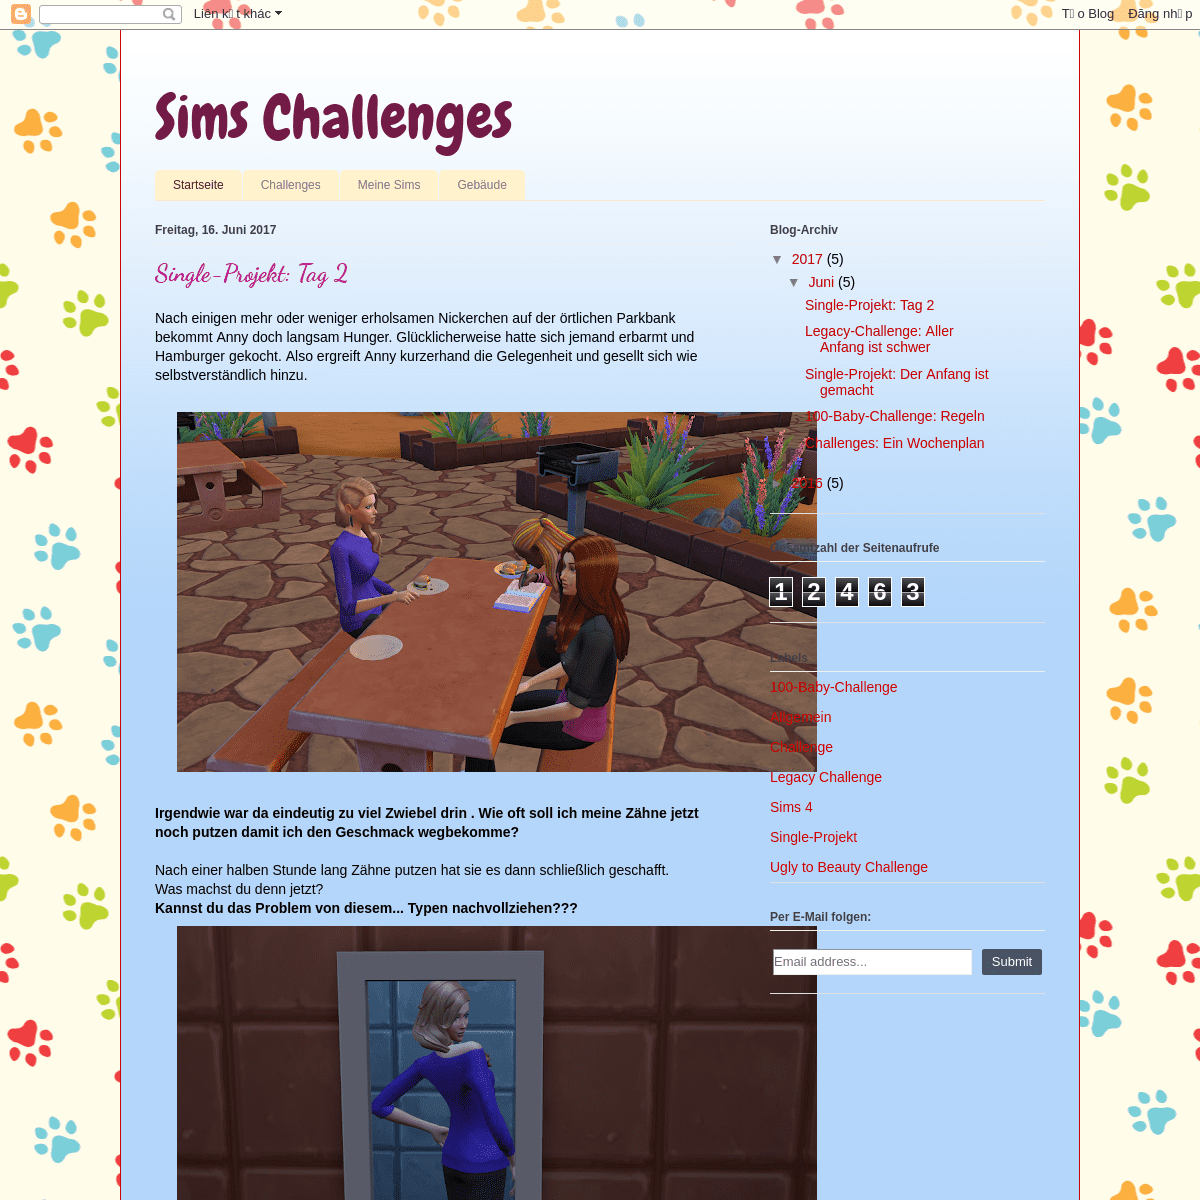 Sims Challenges